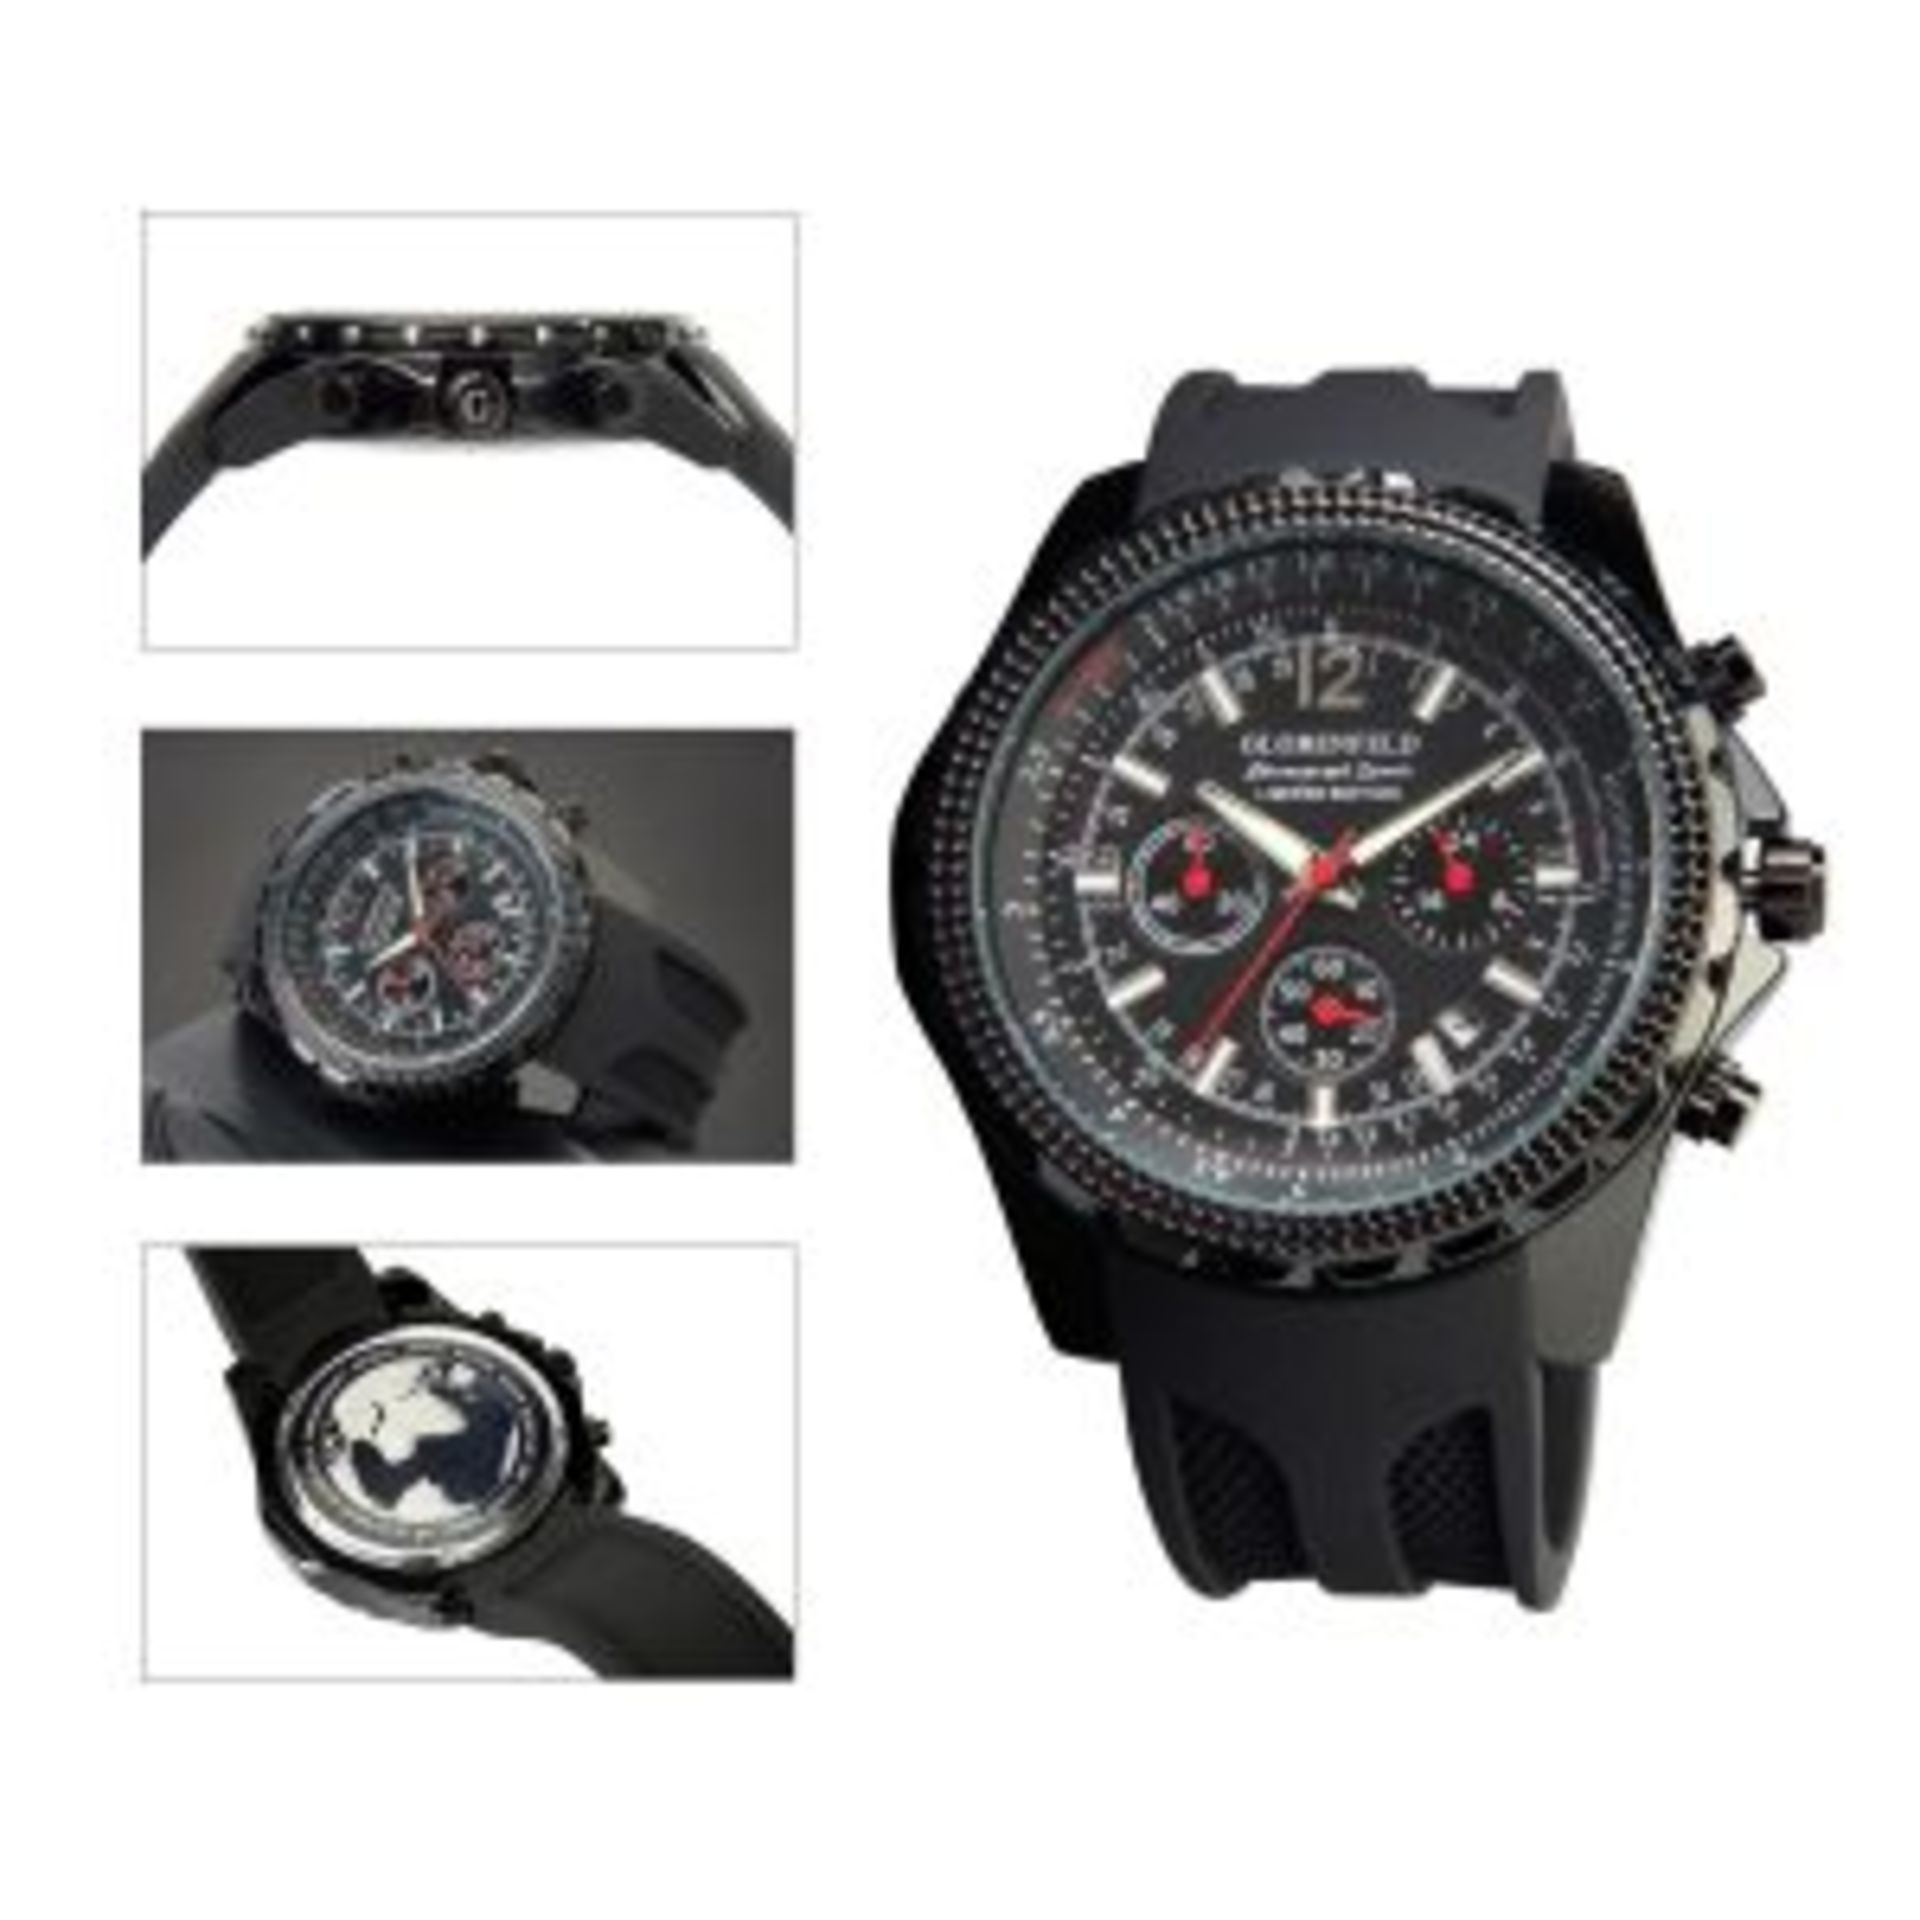 V Brand New Gents Globenfeld Limited Edition Chronograph Sports Watch with Full Chronograph - Image 2 of 2